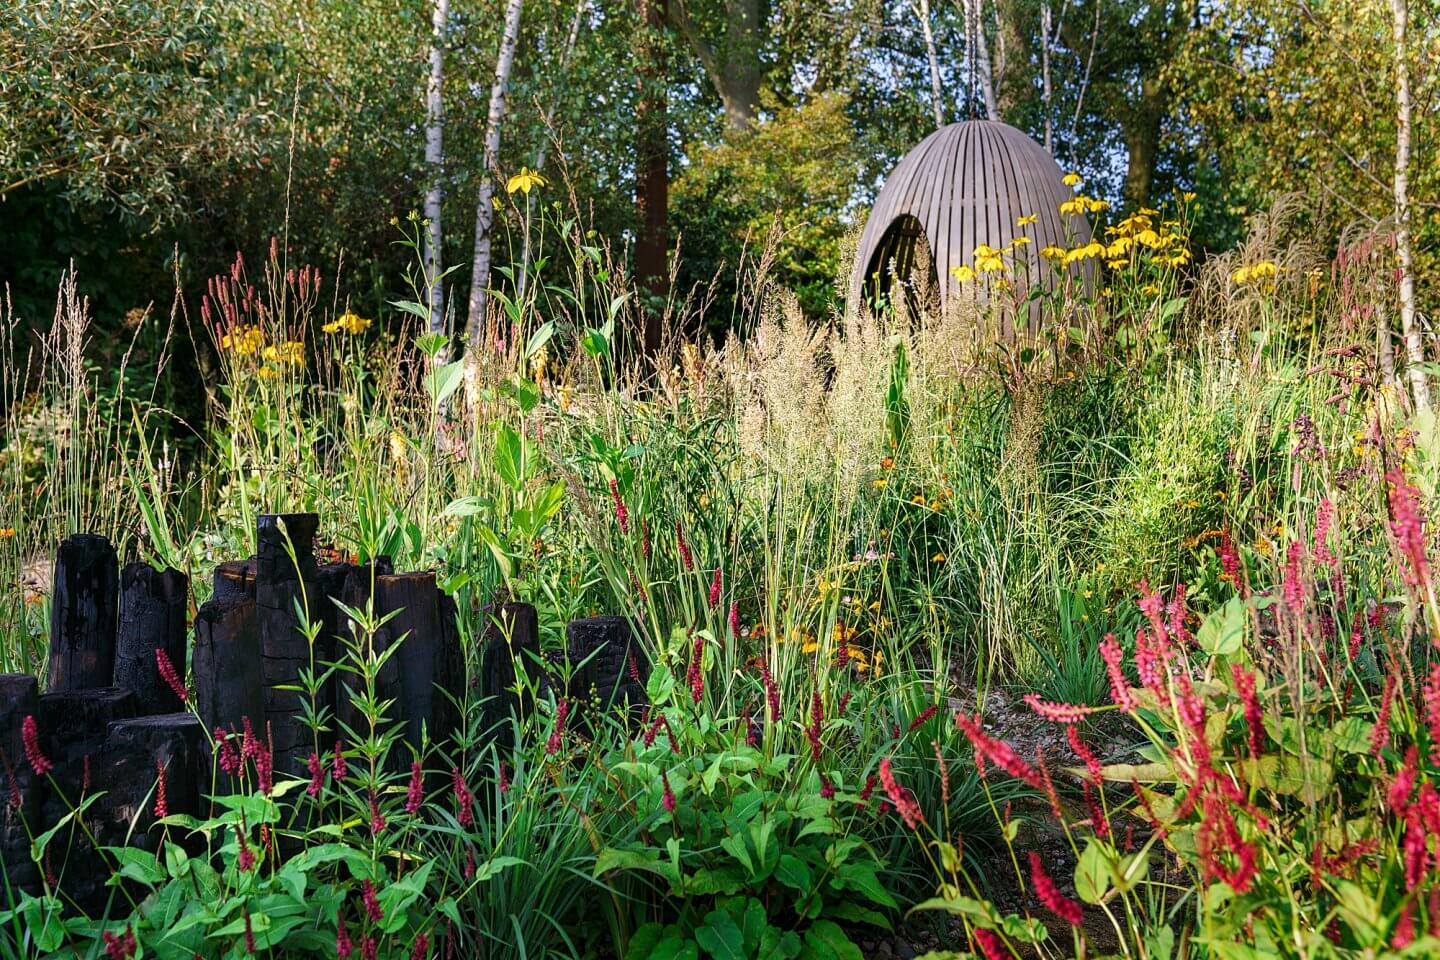 an overview of the Yeo Valley organic garden at RHS Chelsea with egg-shaped hide